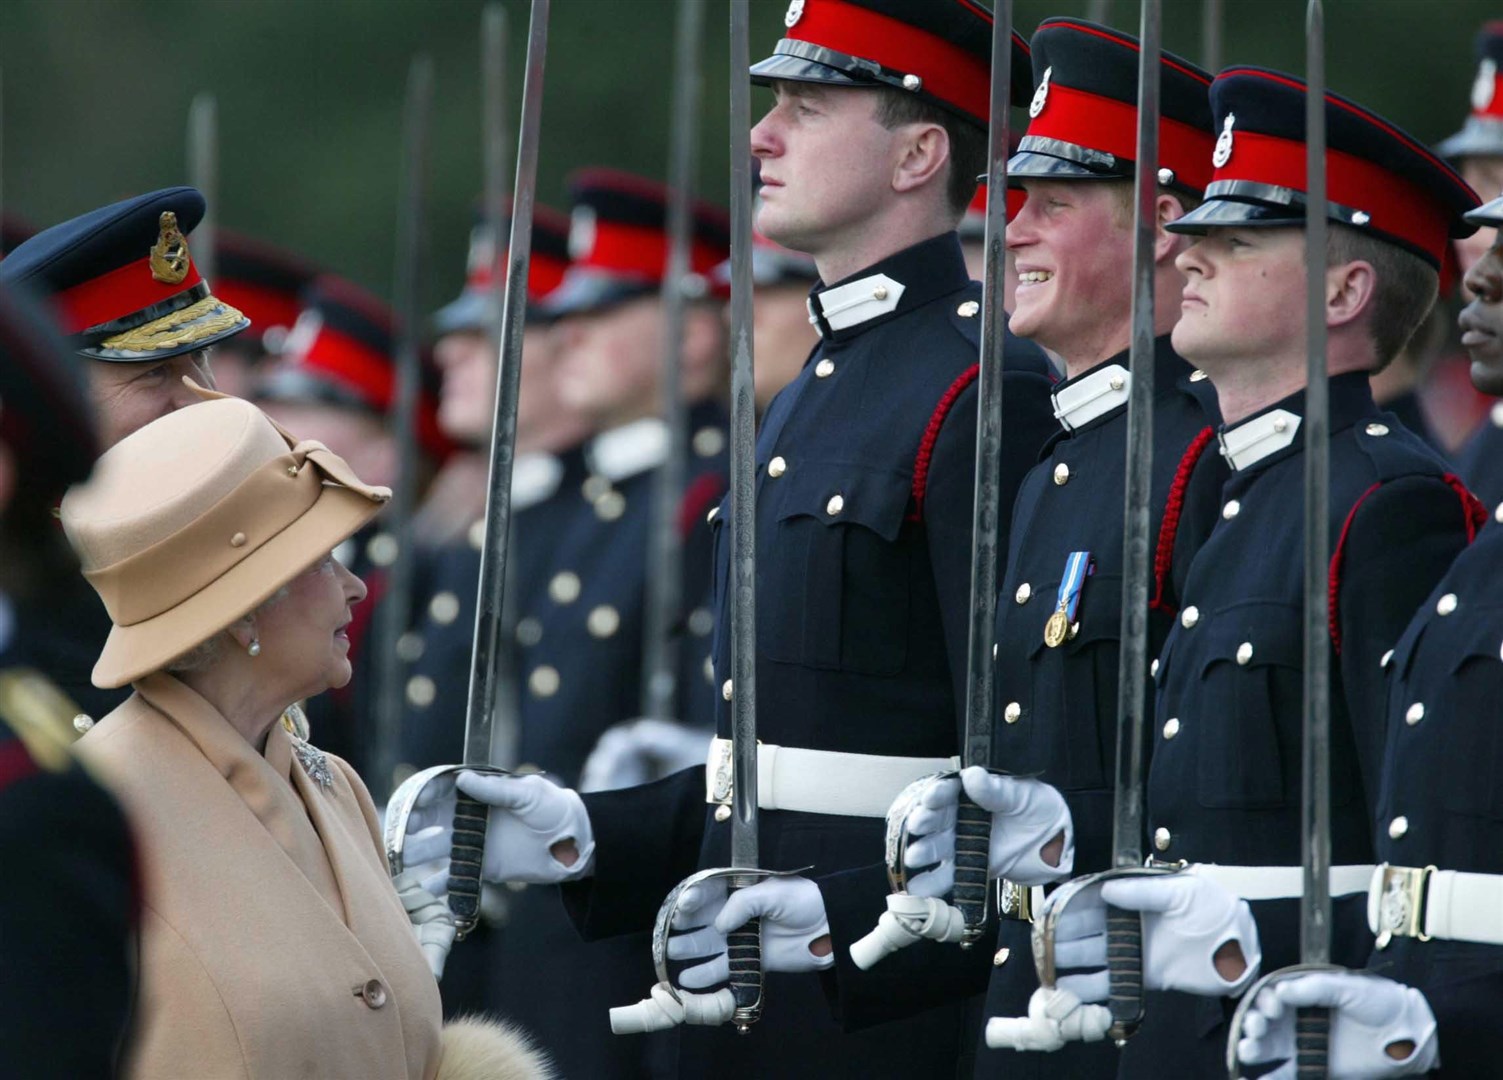 Prince Harry smiling broadly as his grandmother the Queen reviews him and other officers during The Sovereign’s Parade at Sandhurst in 2006 (James Vellacott/PA)